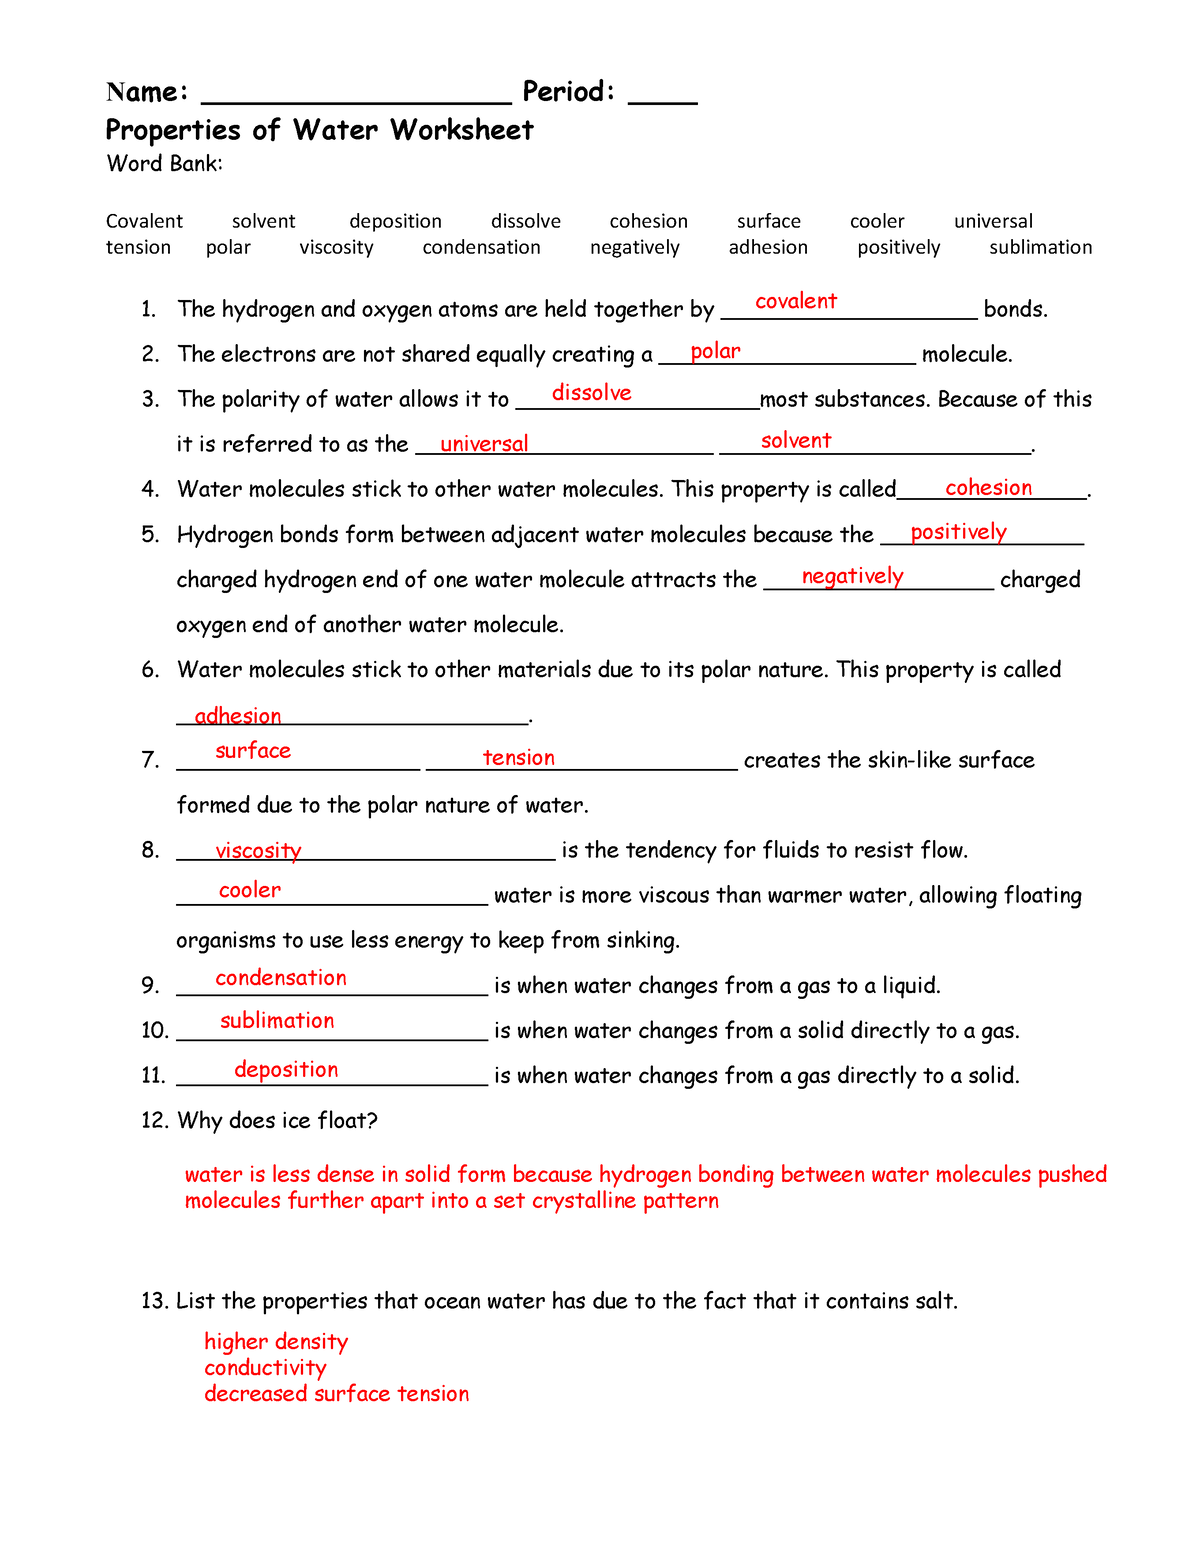 Properties Of Water Worksheet Answers Quizlet